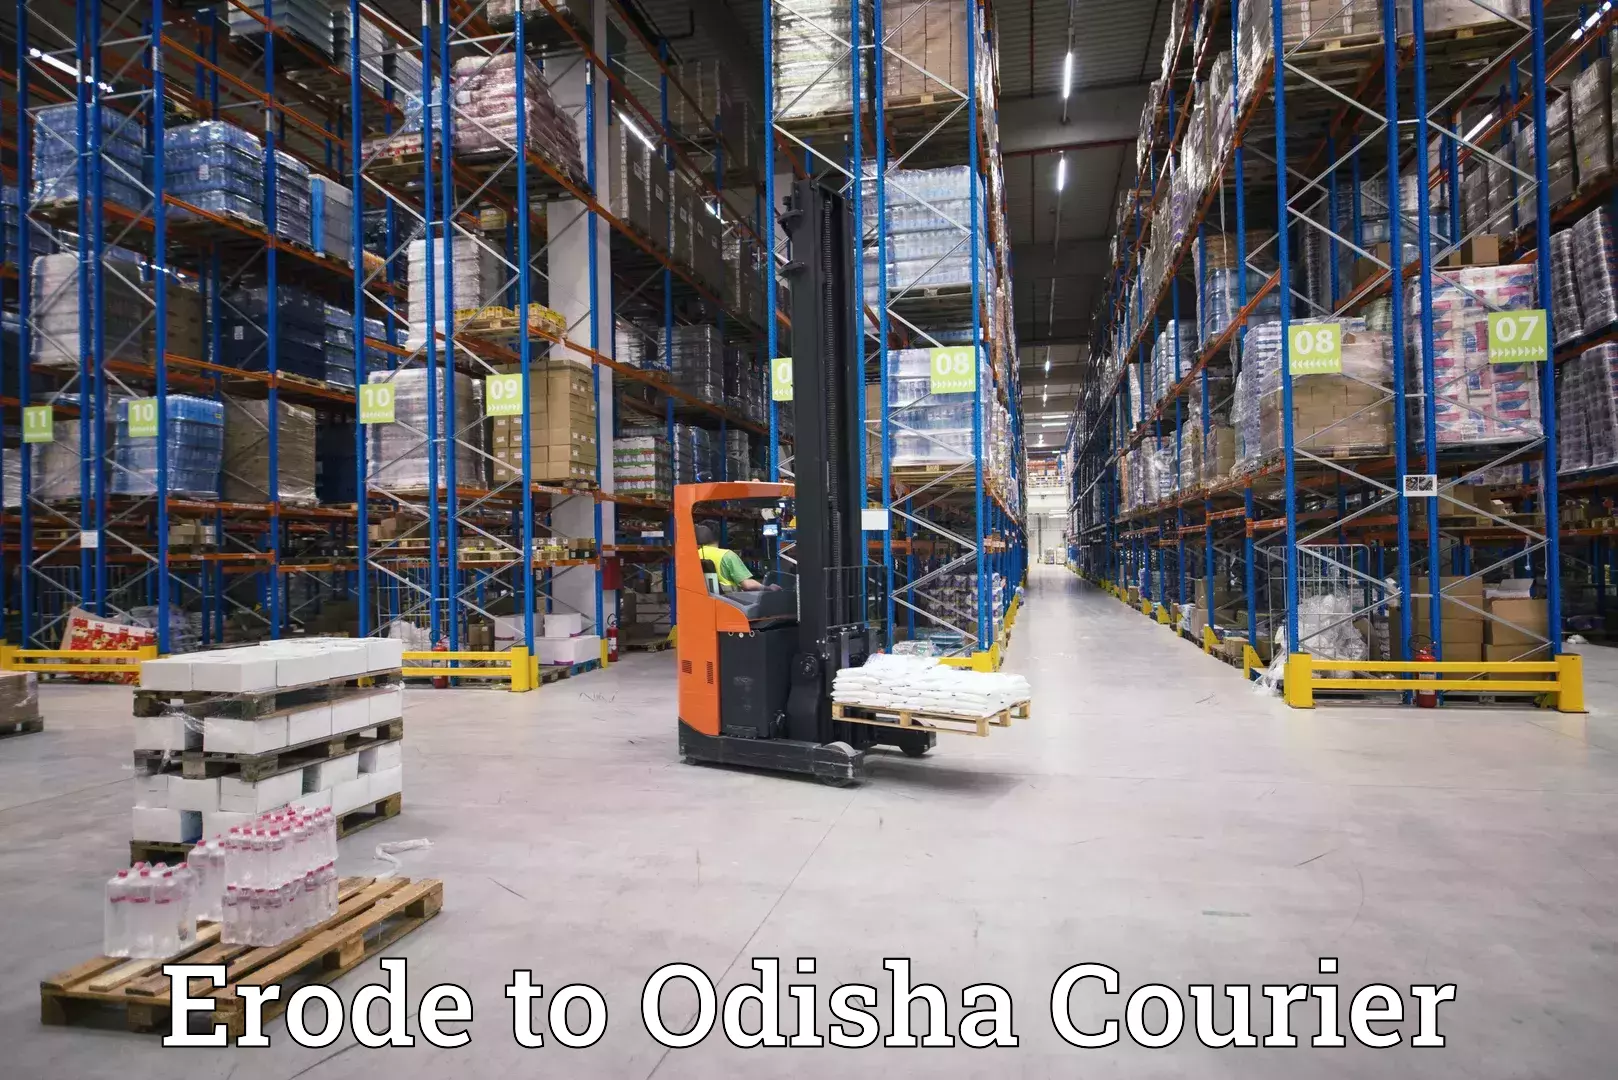 Cash on delivery service Erode to Odisha